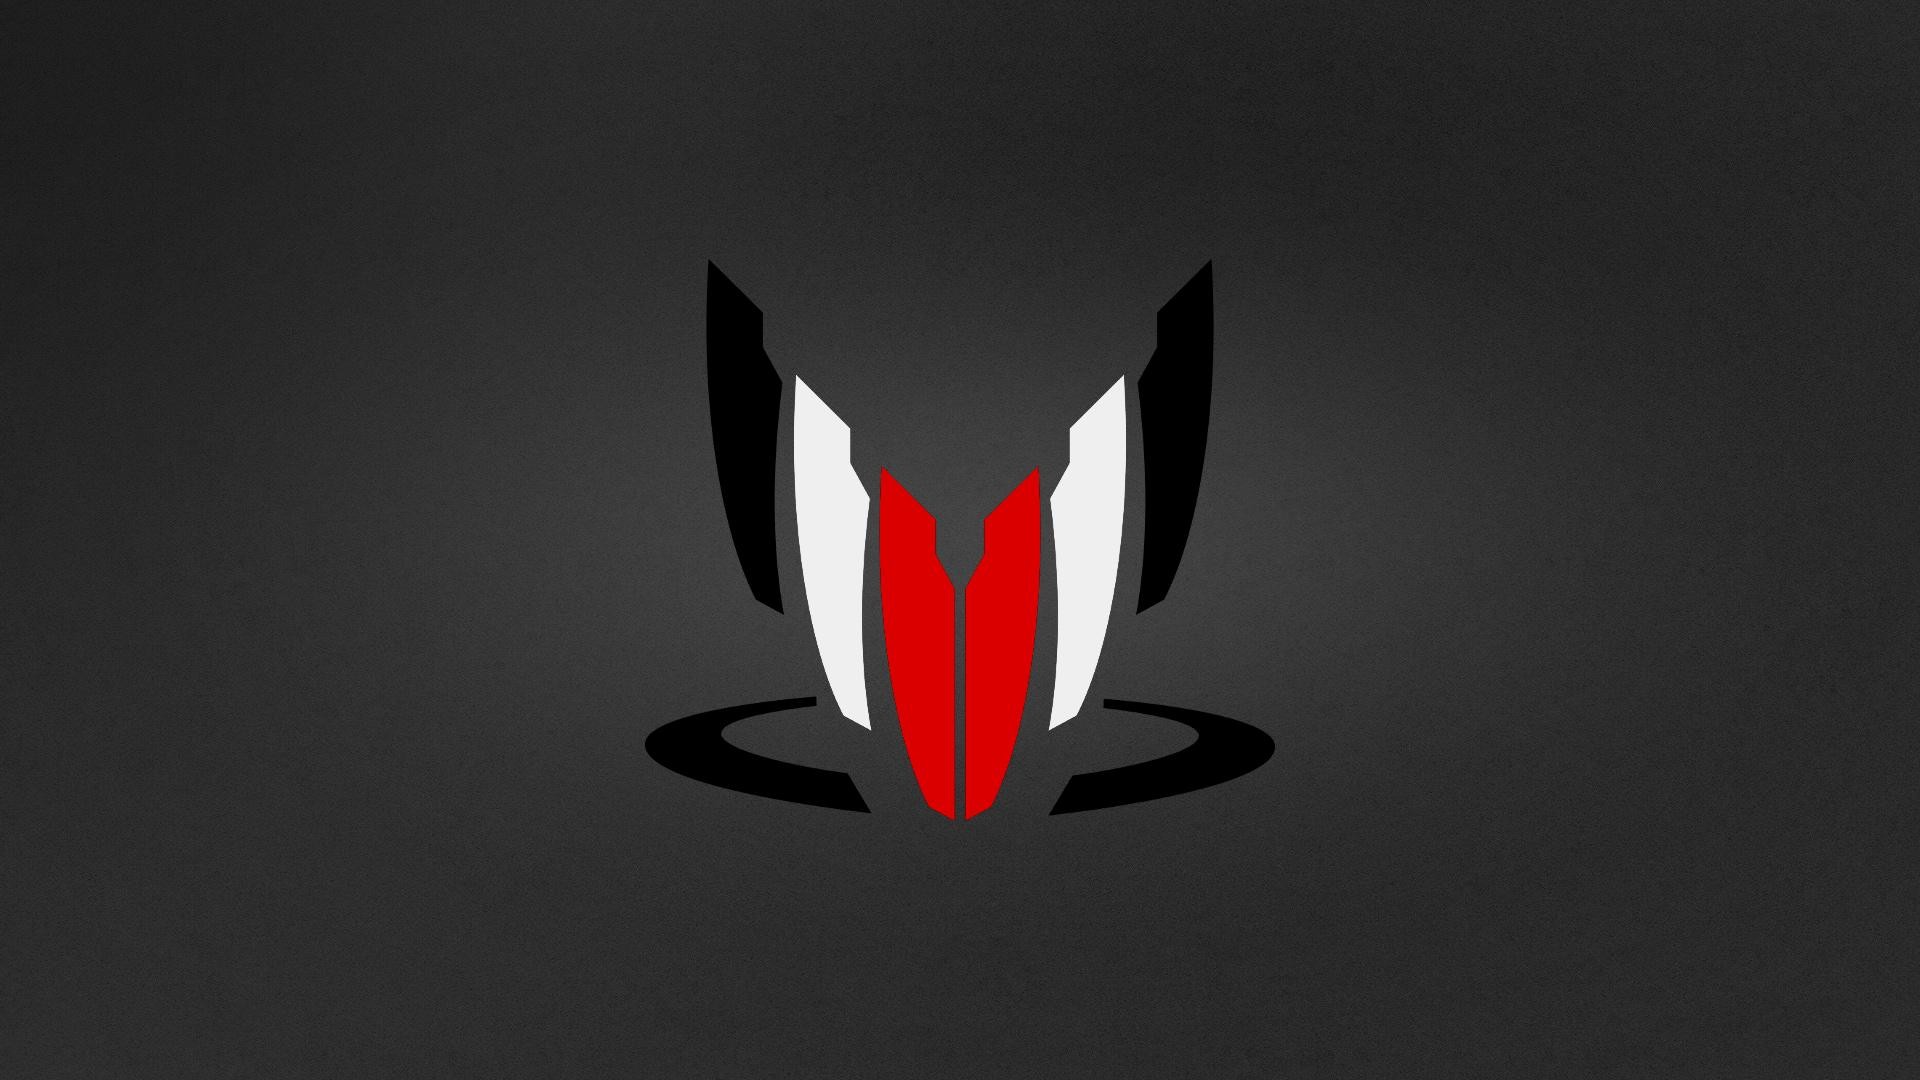 1920x1080 My brother made me a kickass wallpaper. Spectre logo with N7 .